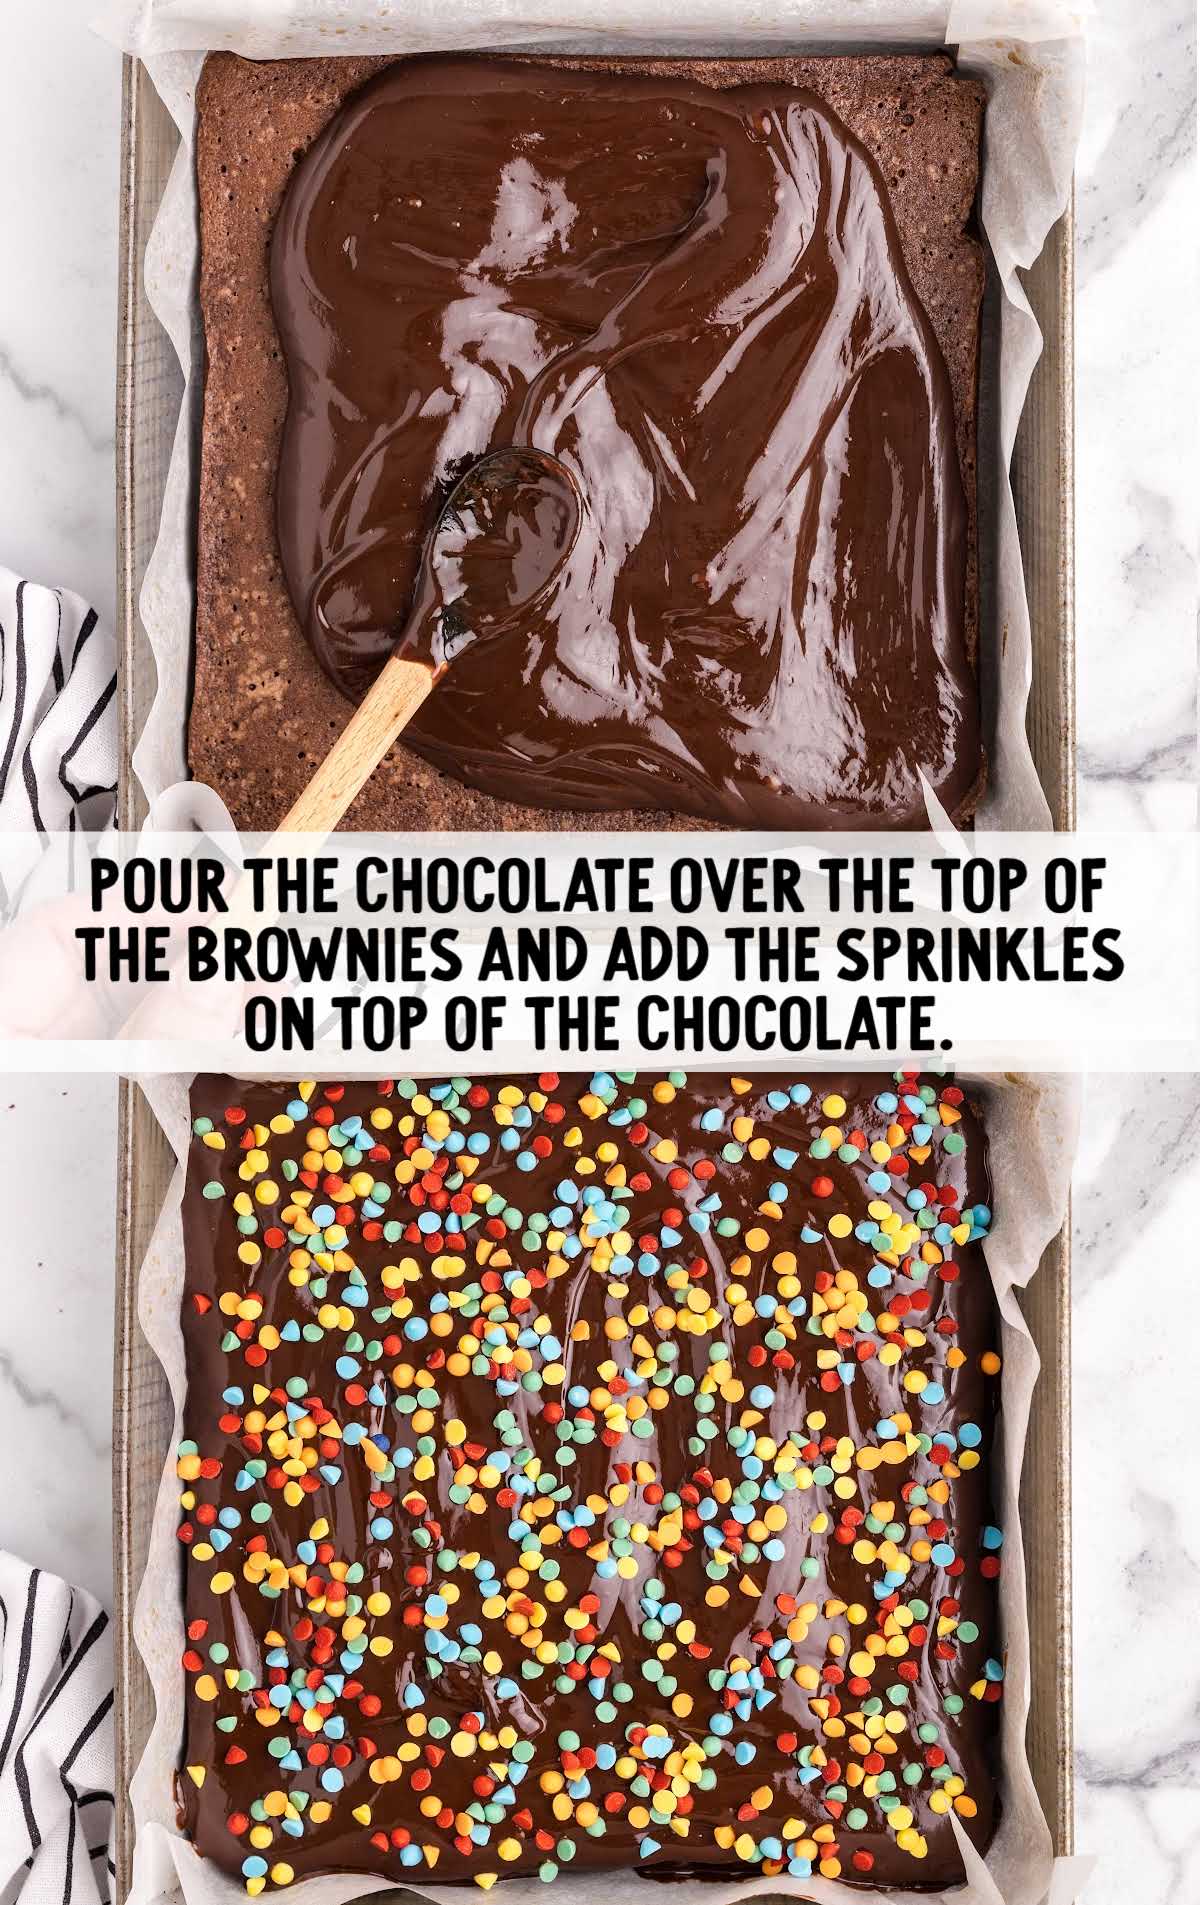 chocolate poured over the top of the brownies as well as the sprinkles in a pan